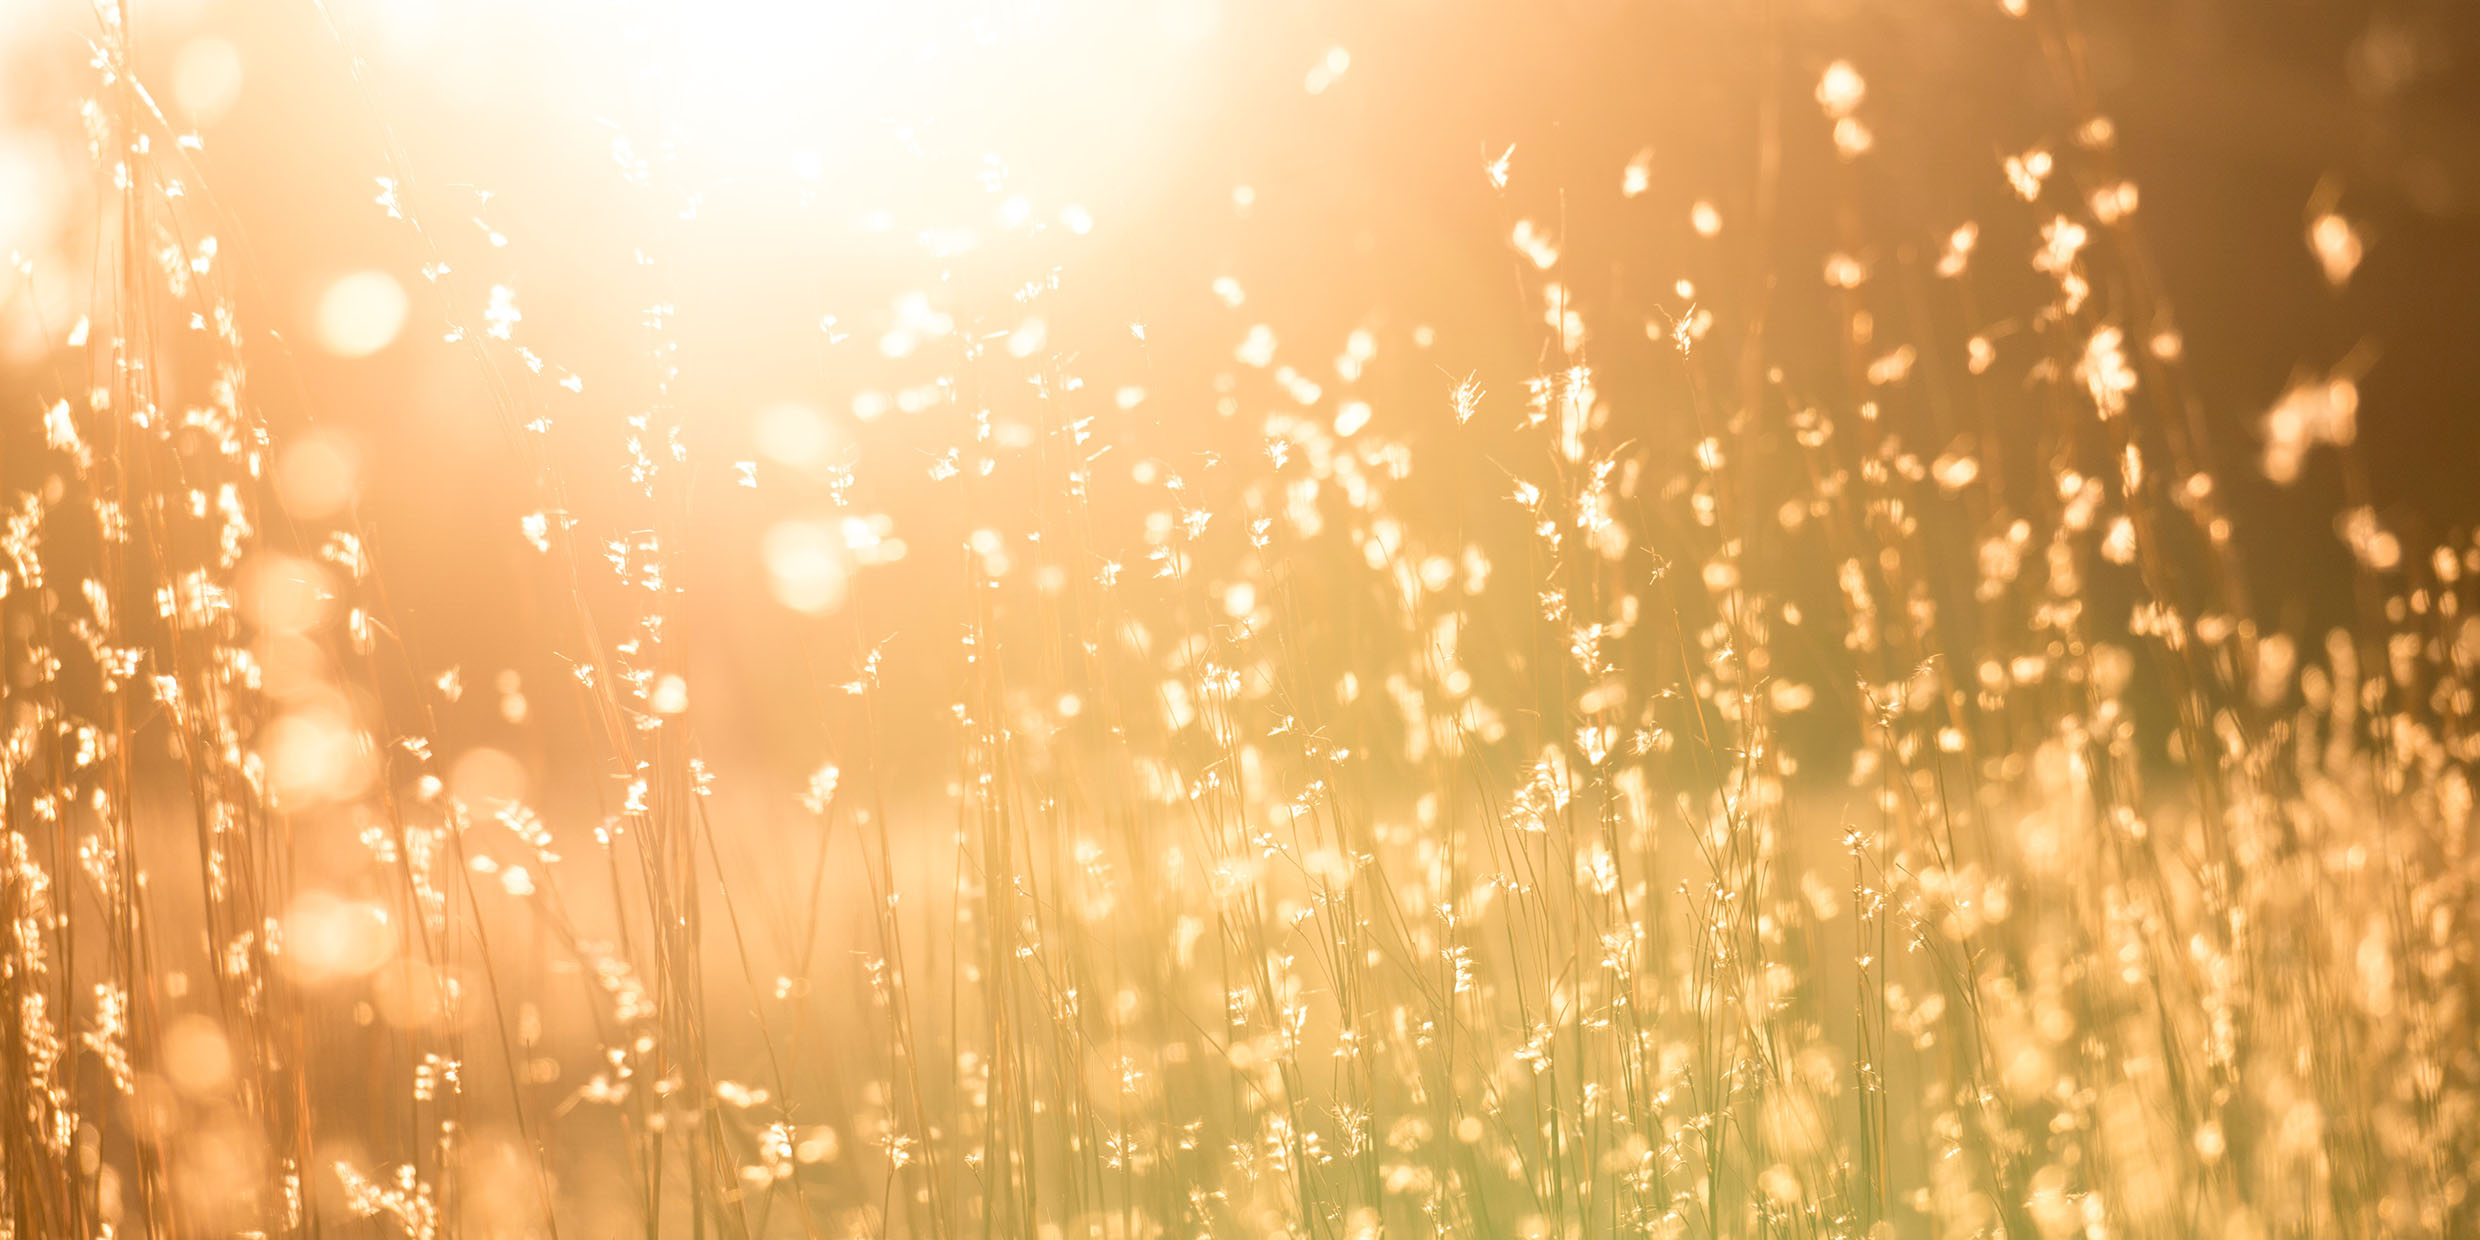 Soft focus image of a meadow at sunrise, with sparking lights throughout